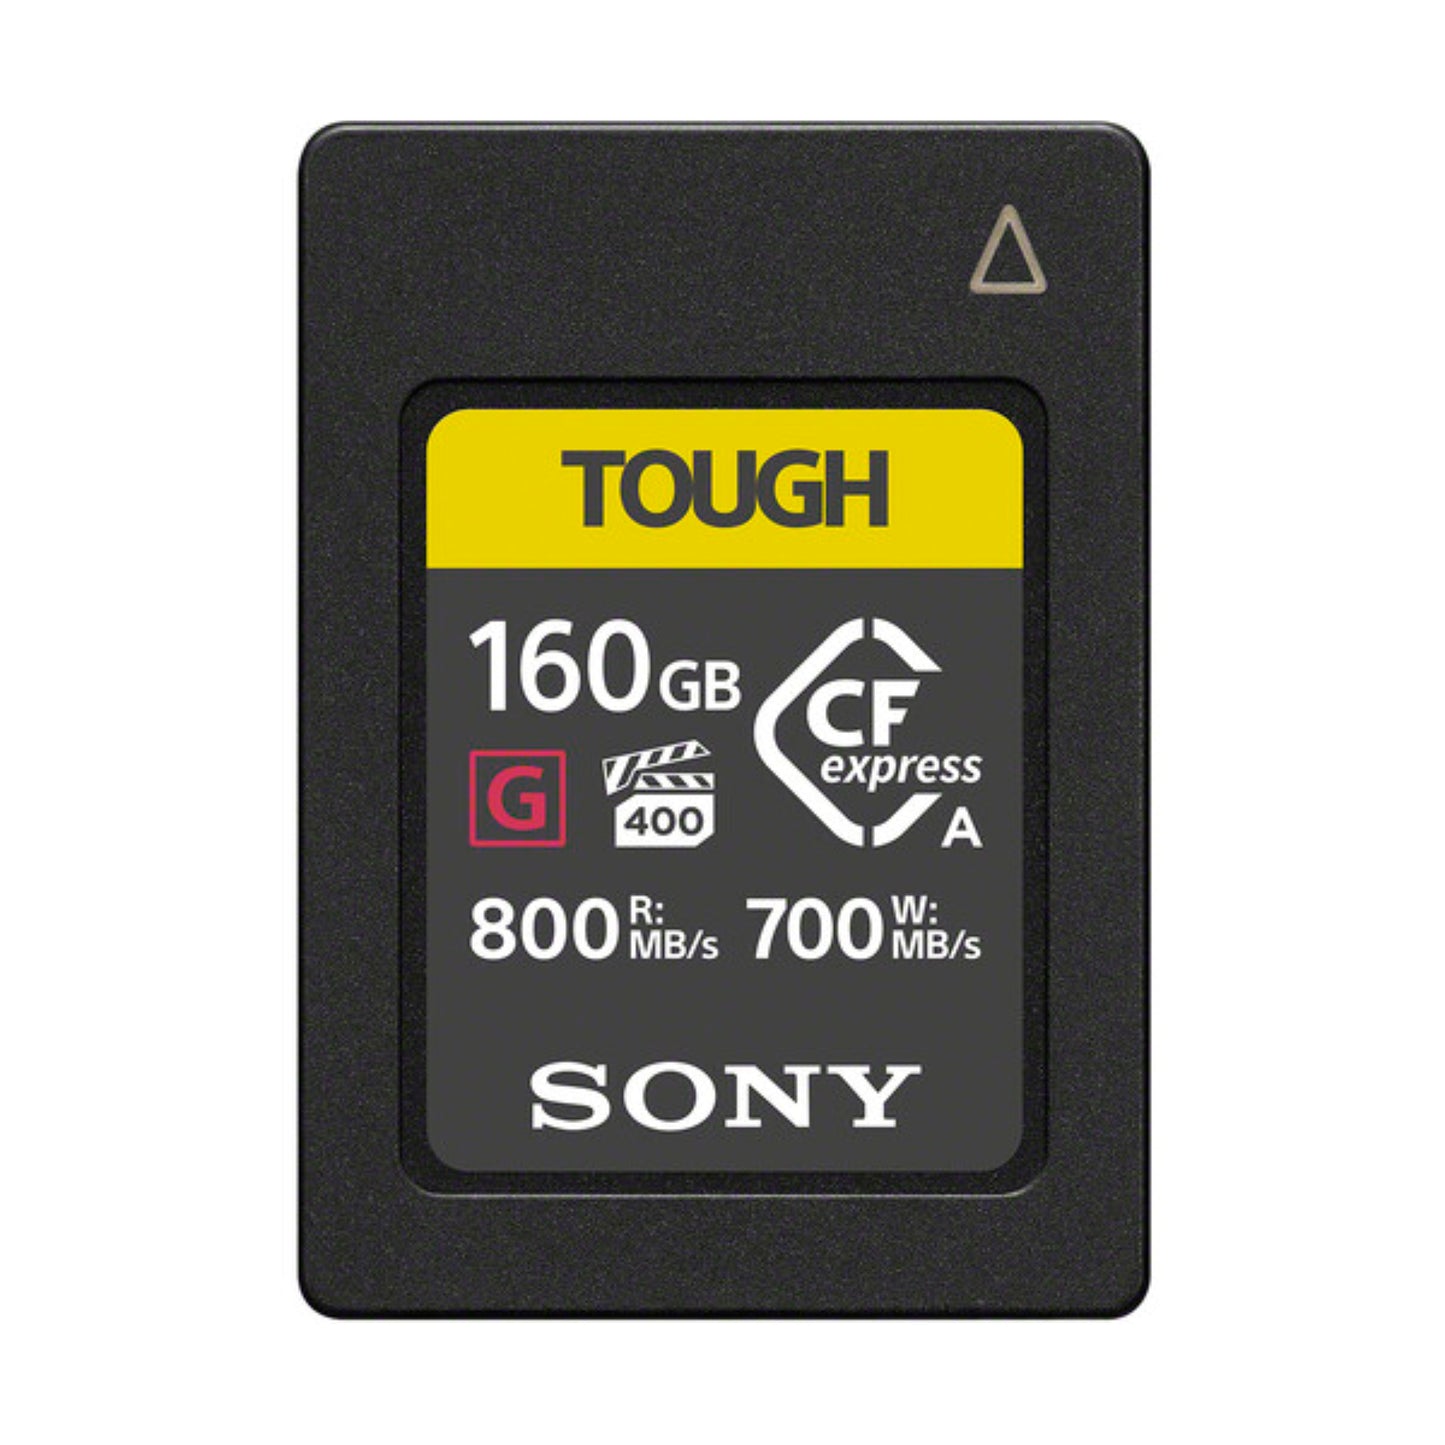 Buy Sony CFexpress Type A TOUGH Memory Card 160gb | Topic Store